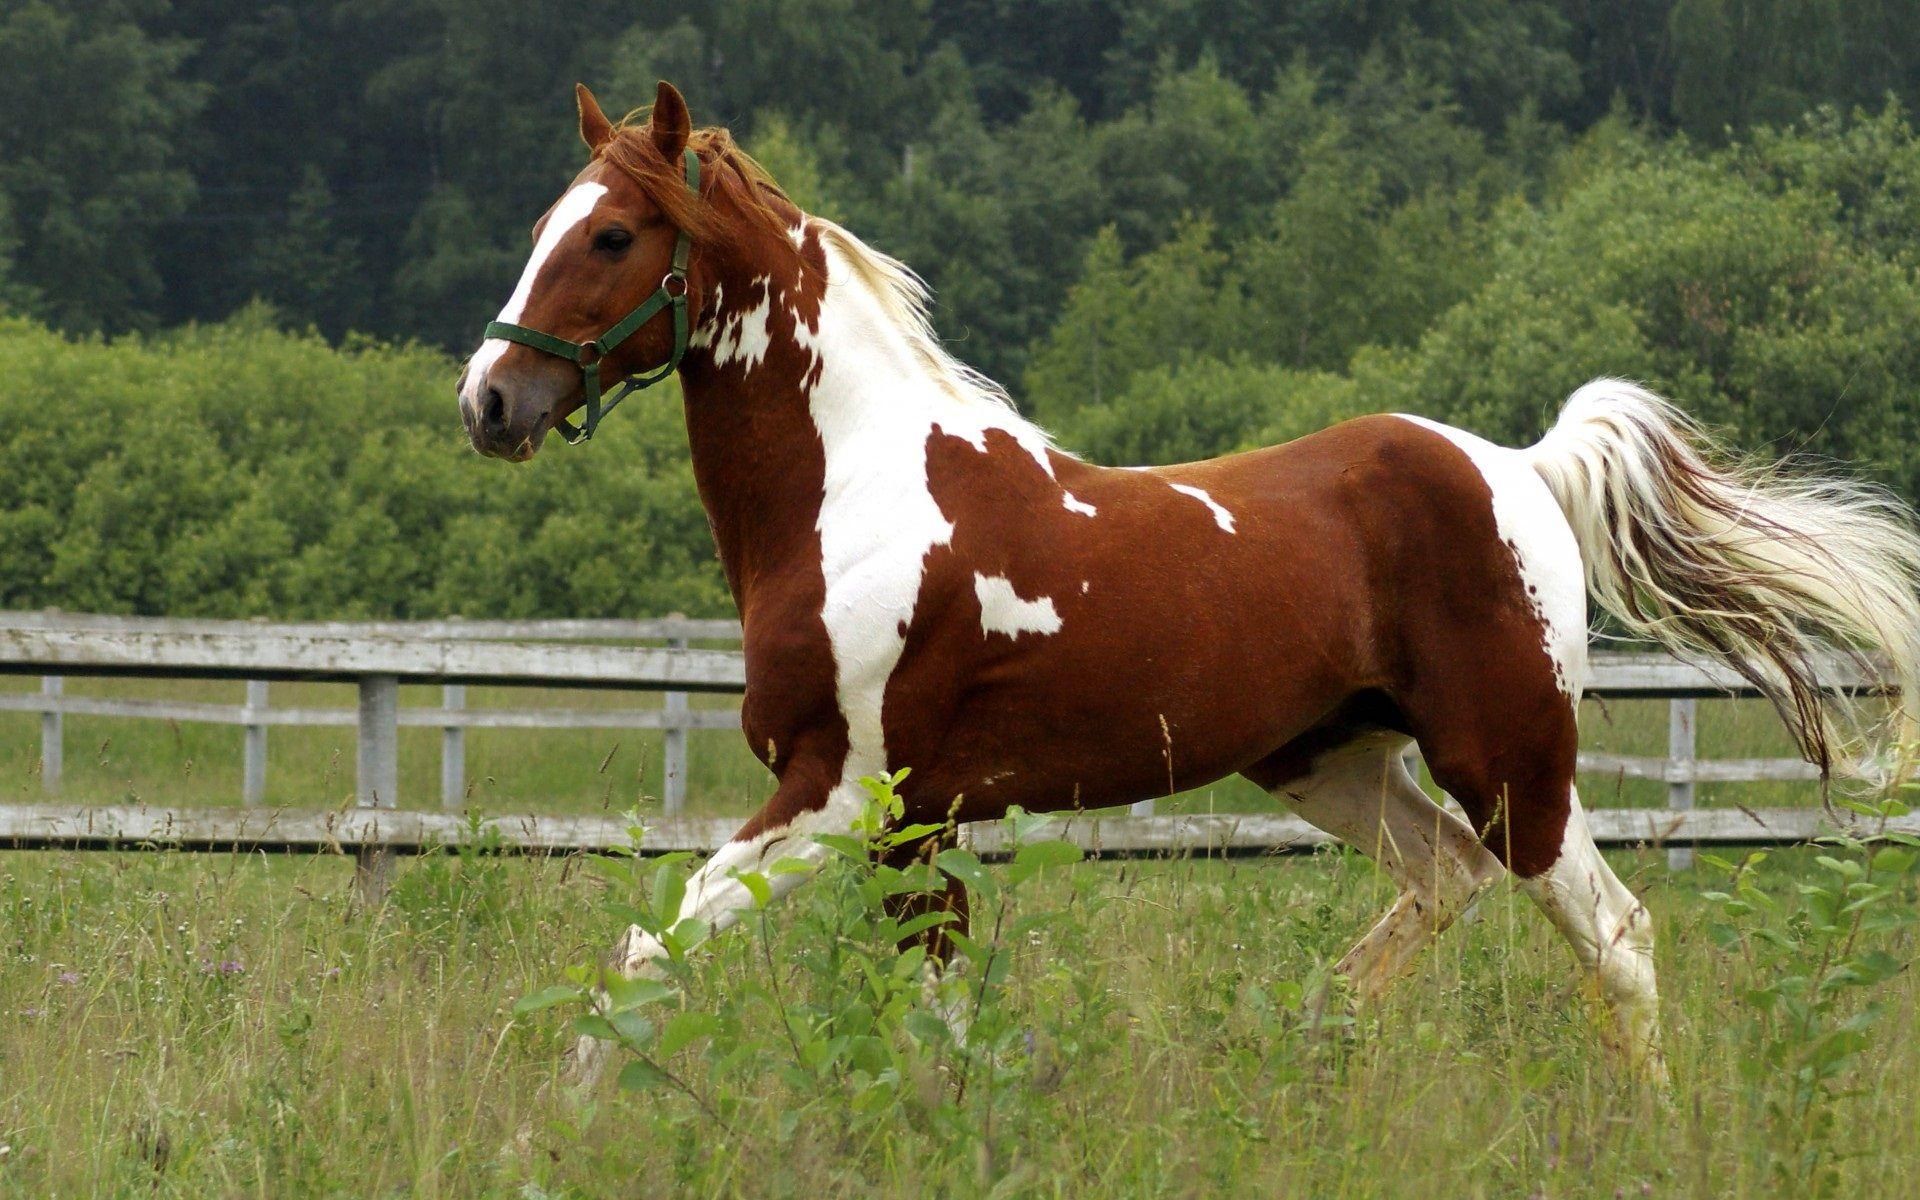 Download Horses 6713 1600x1200 px High Resolution Wallpaper